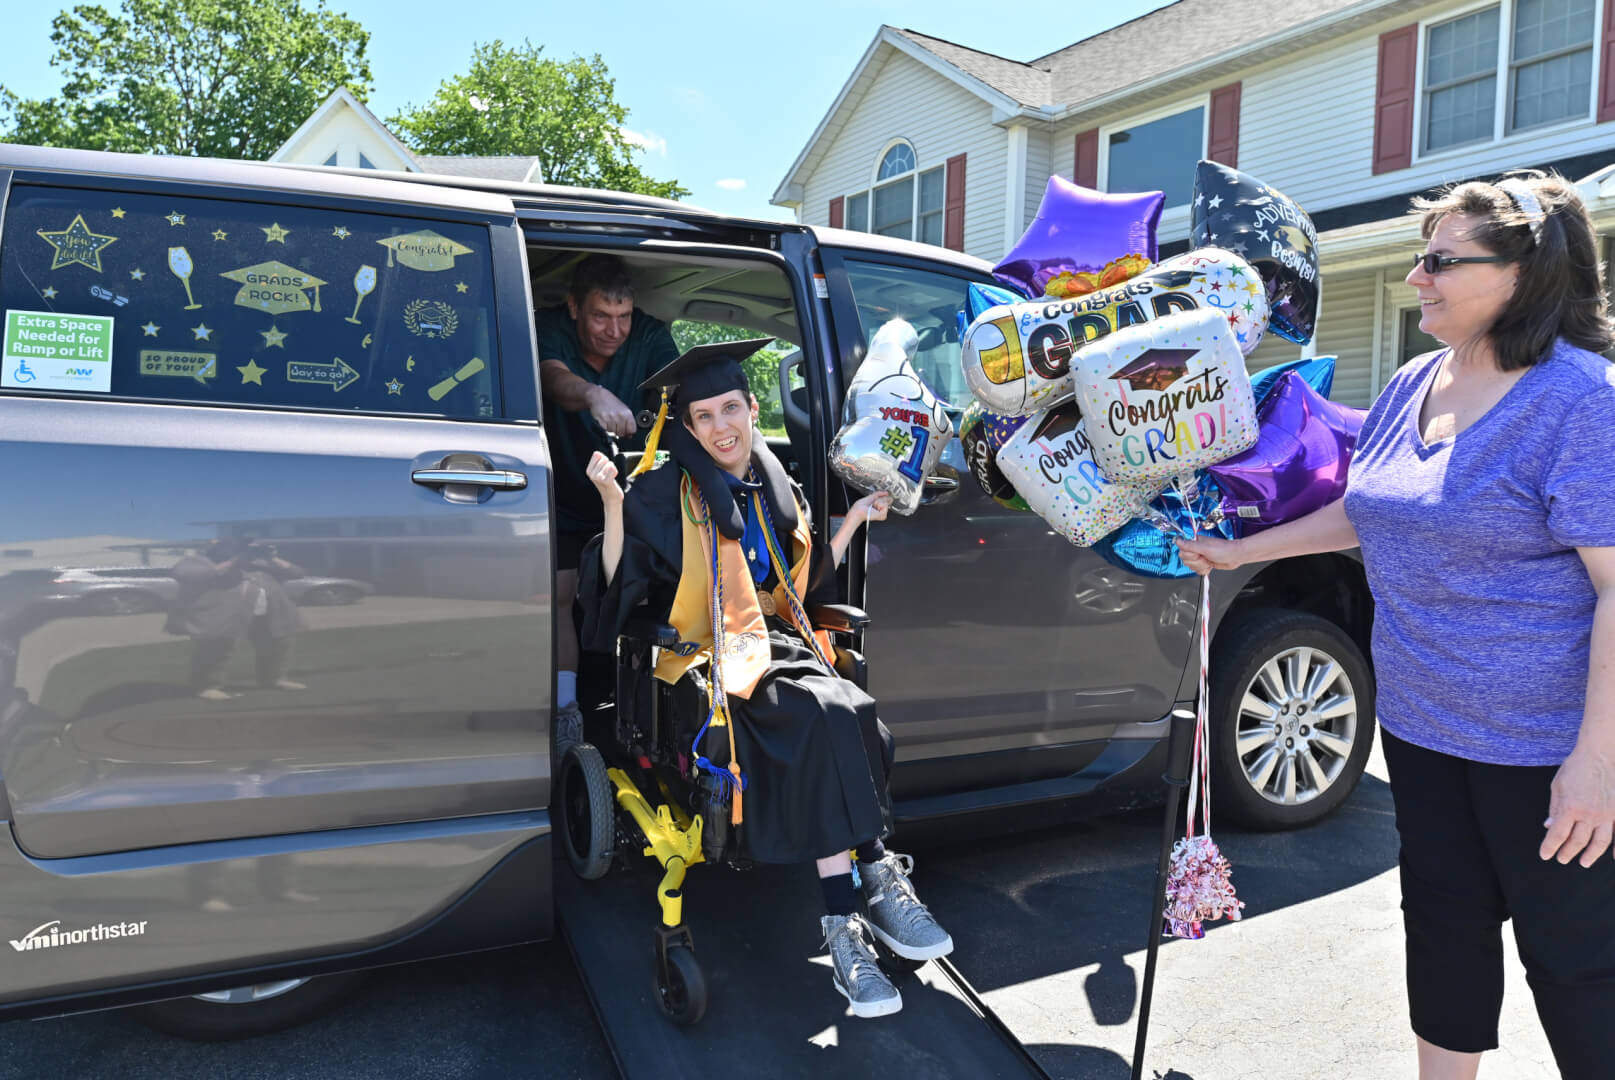 Lizzie and her family are all smiles on graduation day as she exits her accessible van in her cap and gown.